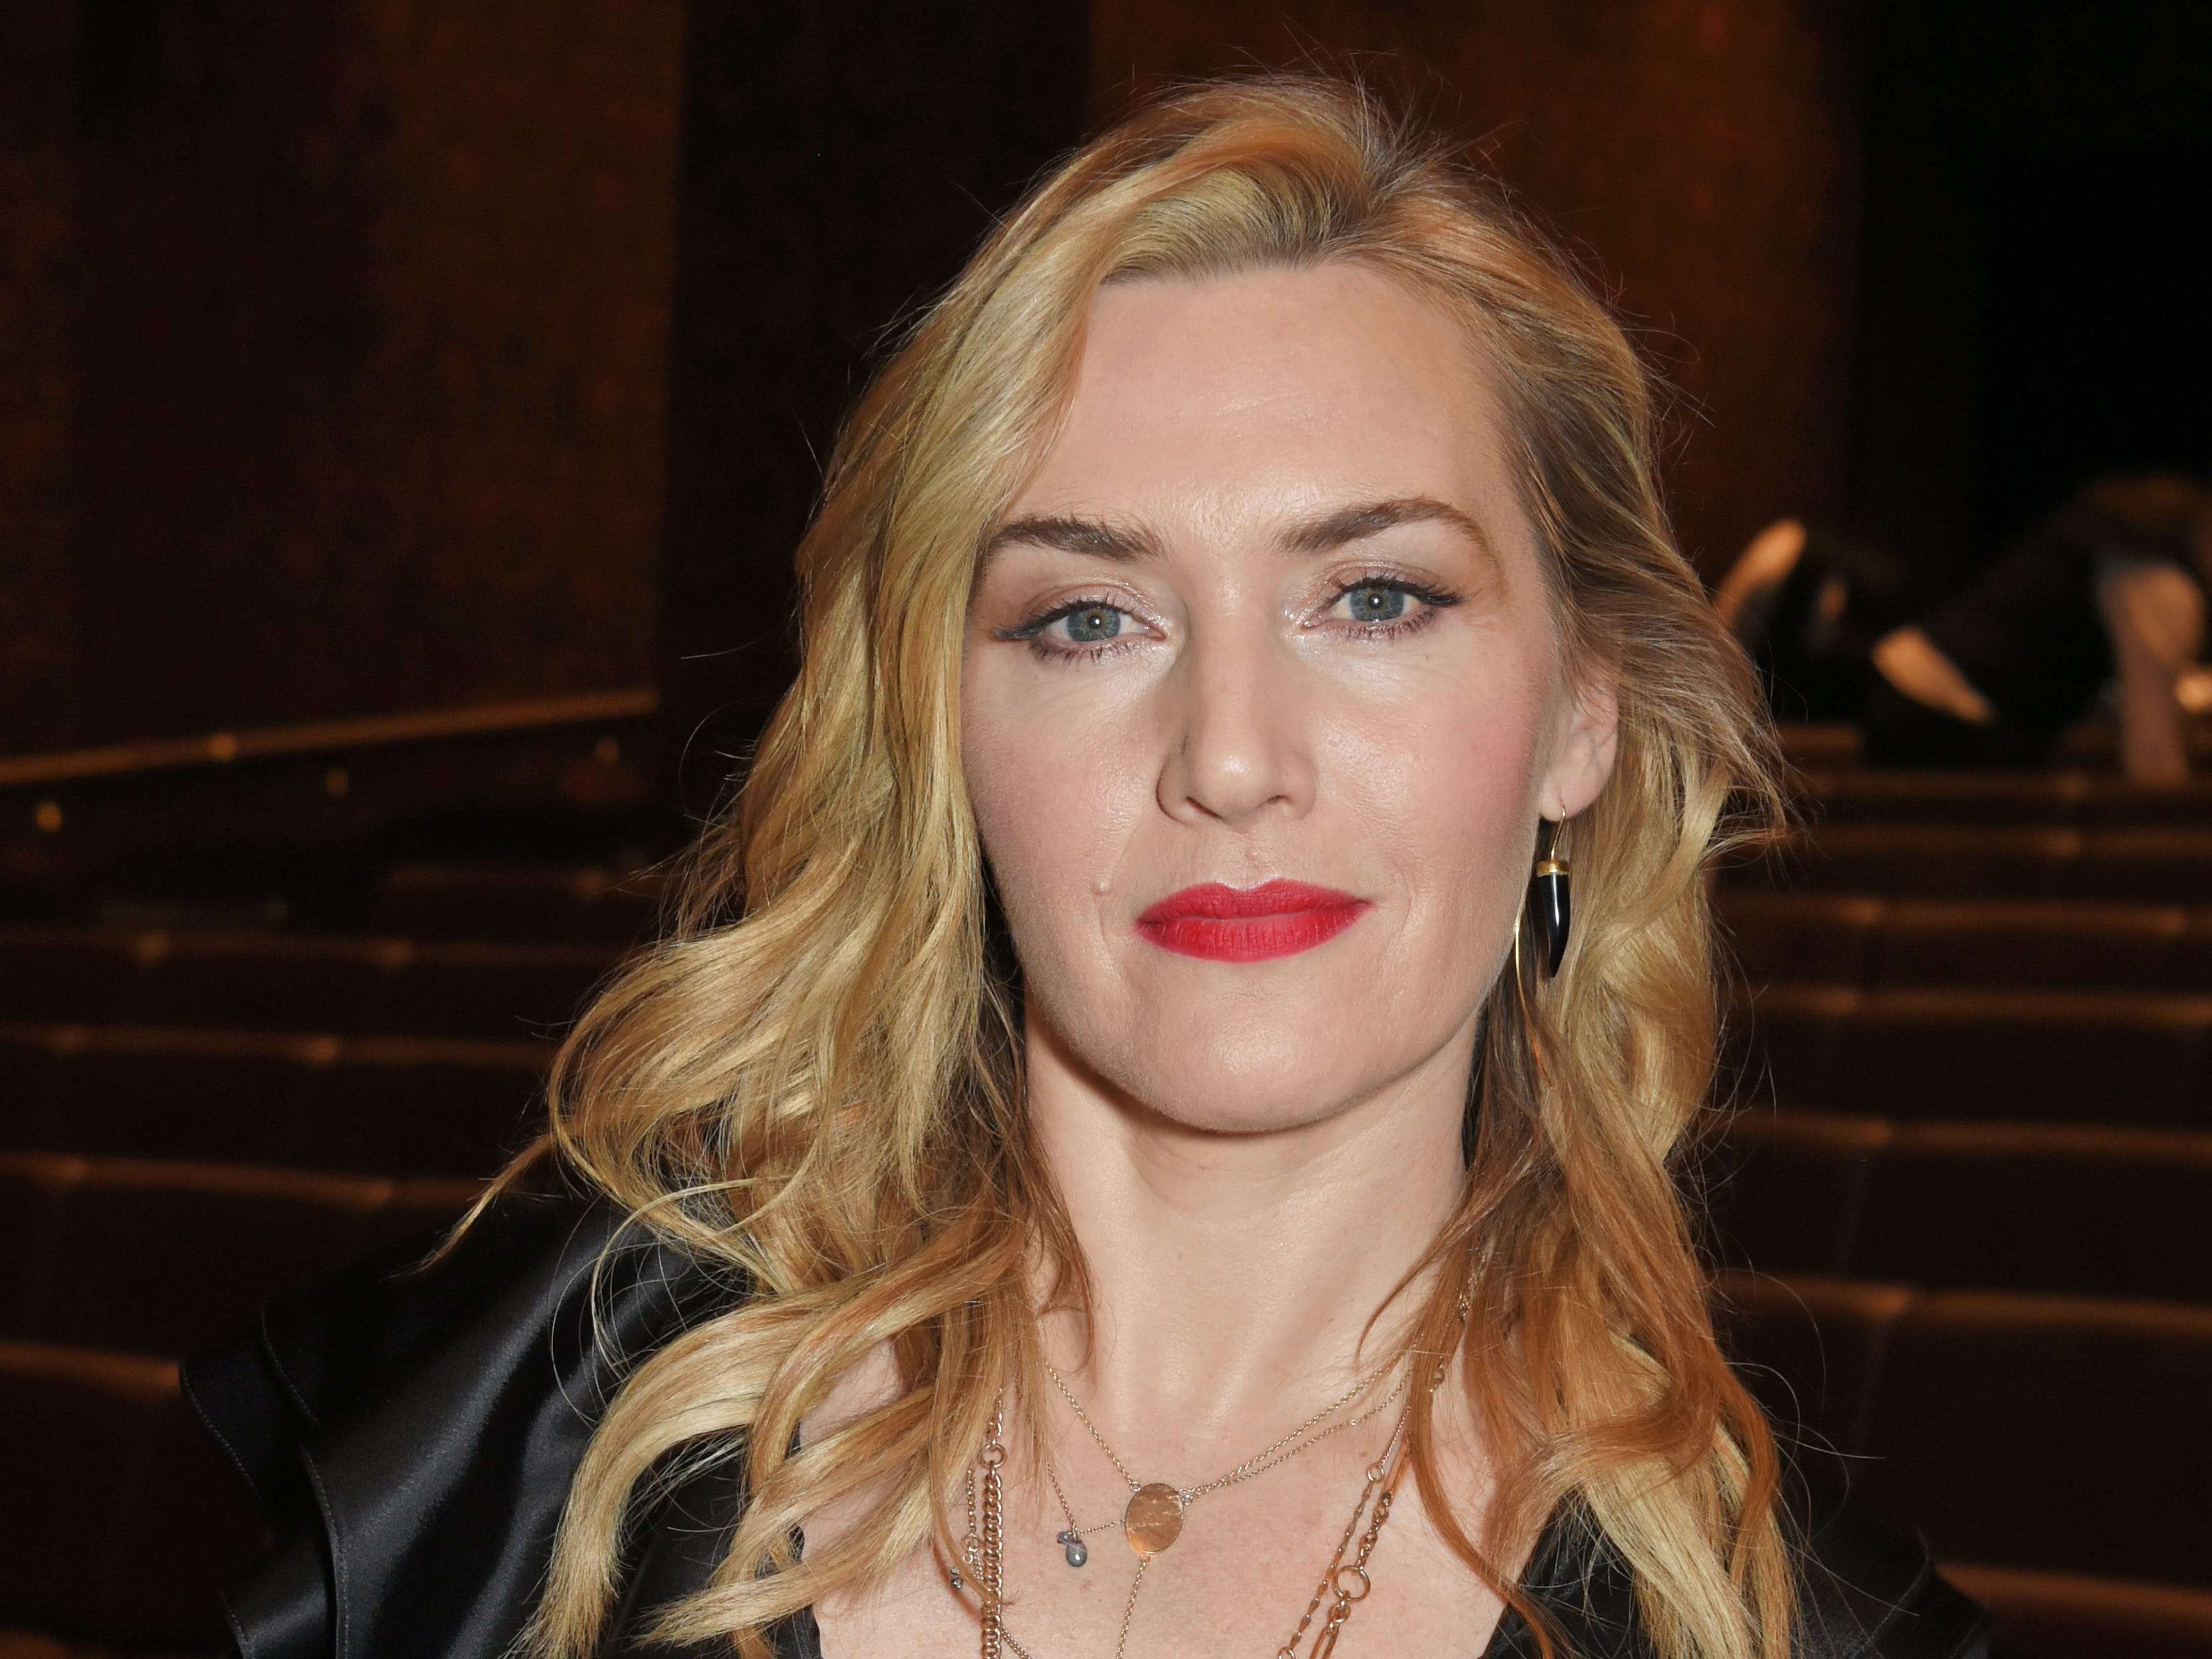 Kate Winslet says she hid in the trunk of the car where a 19yearold